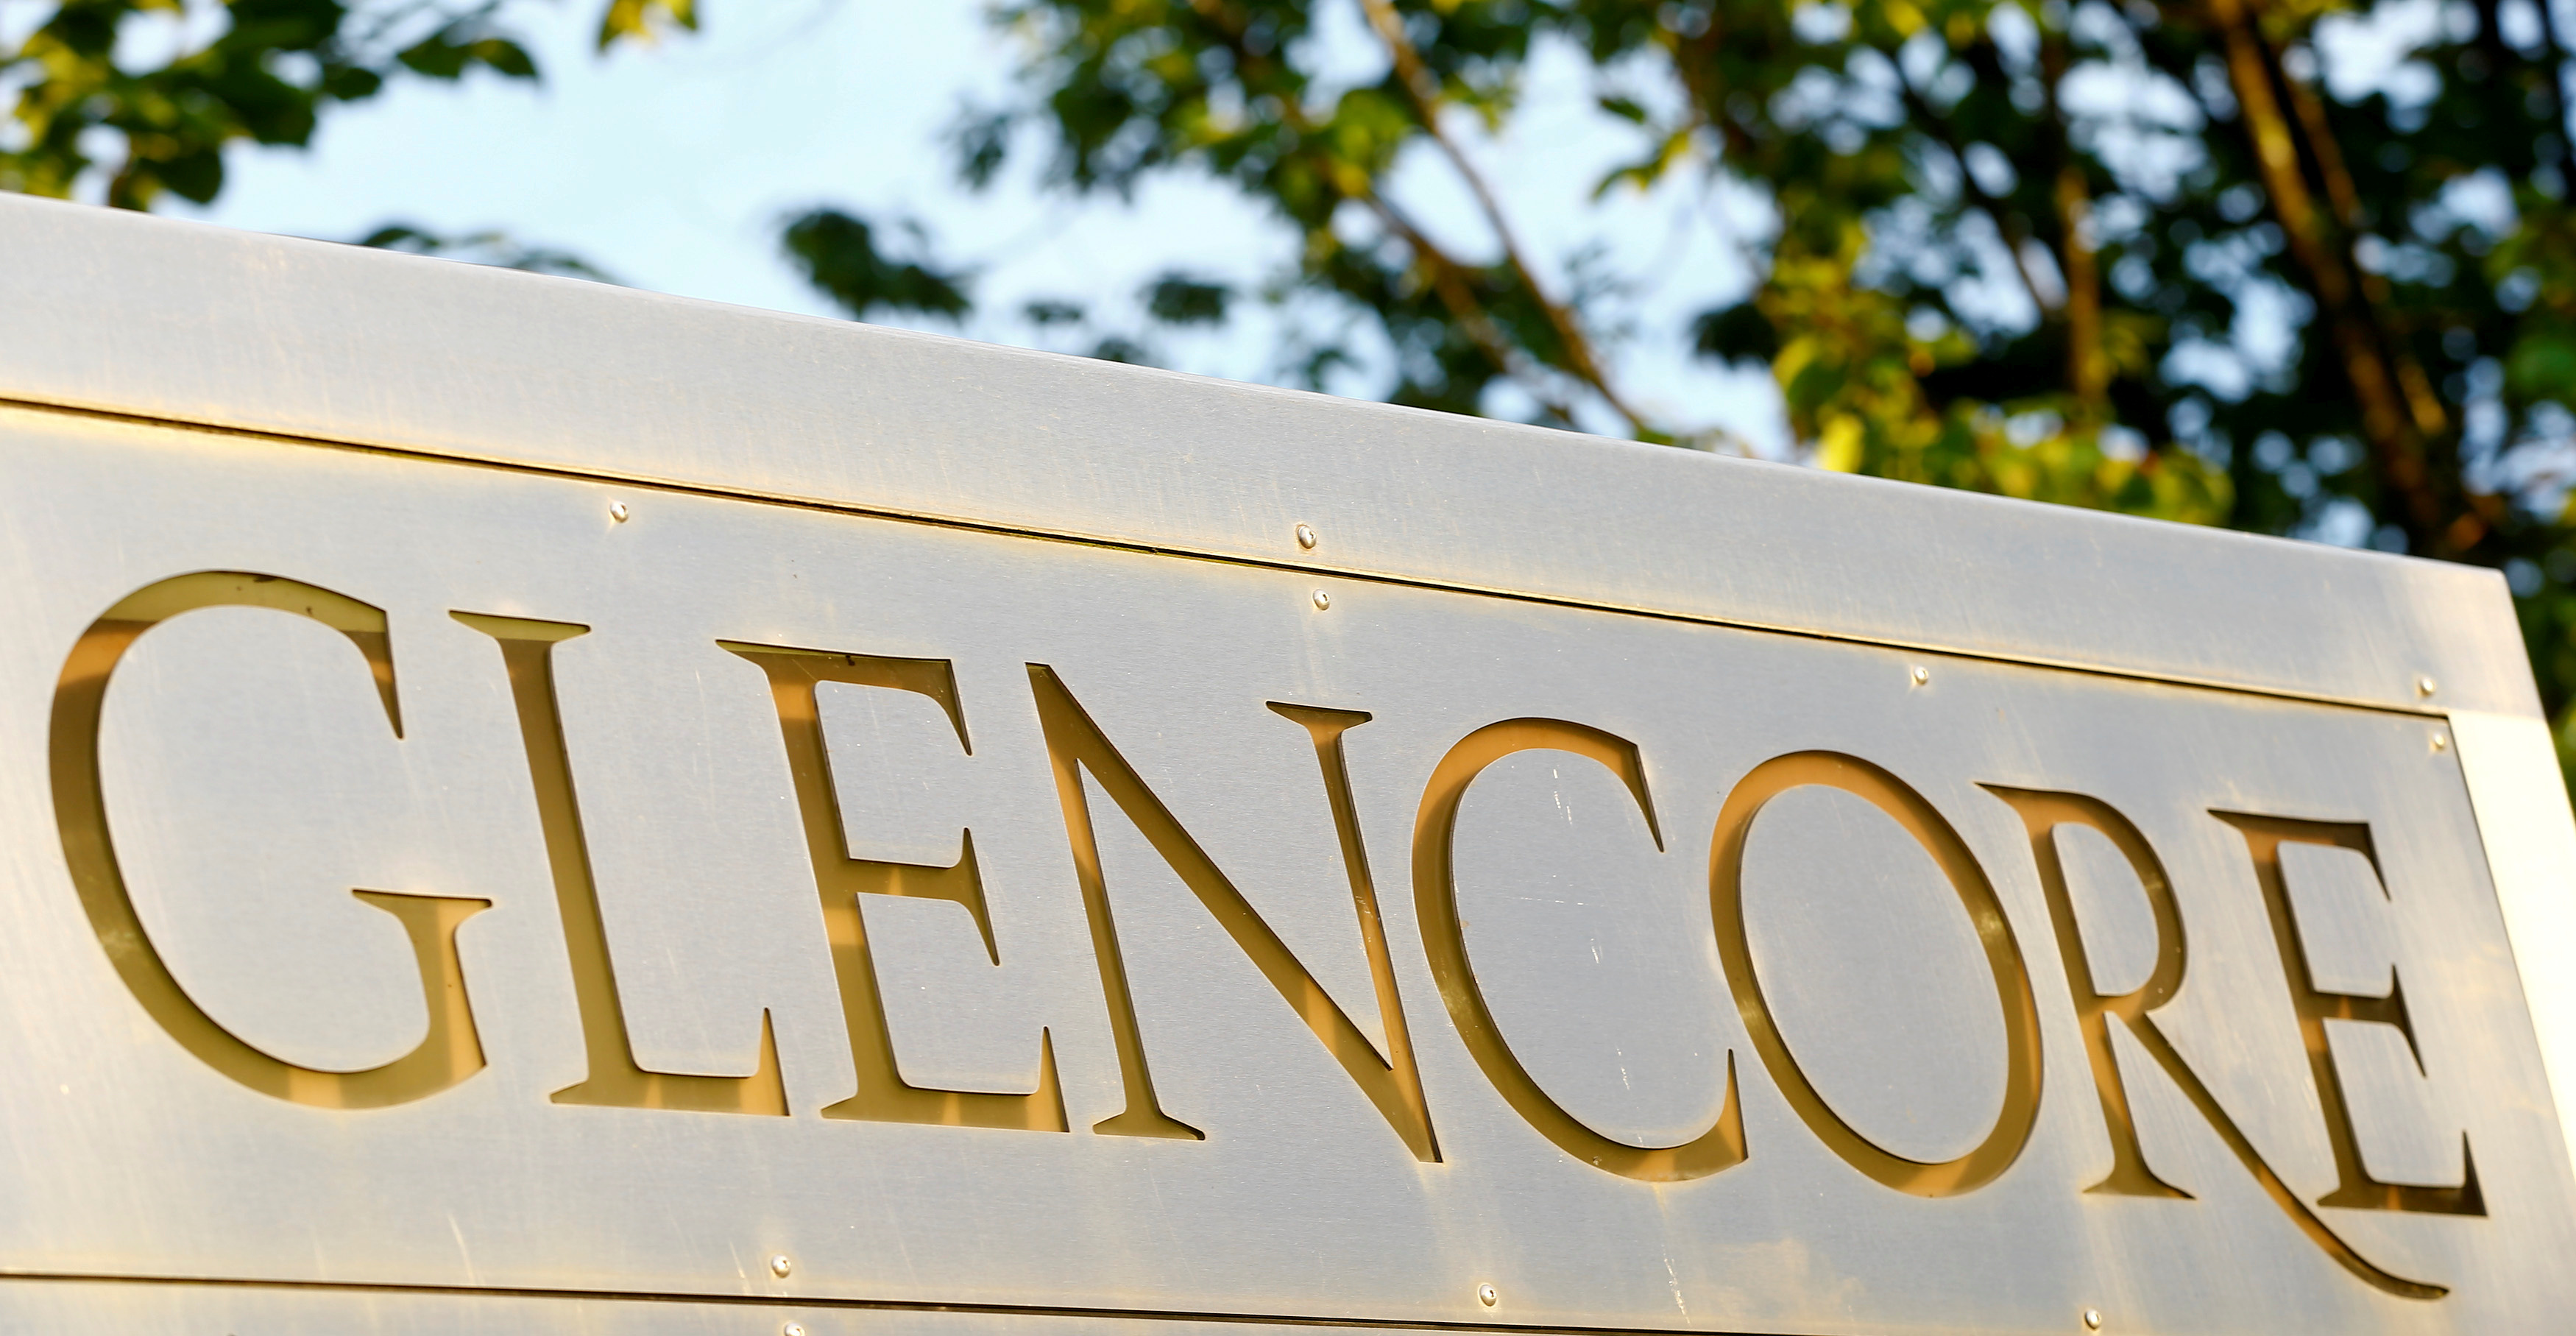 The logo commodities trader Glencore is pictured in Baar